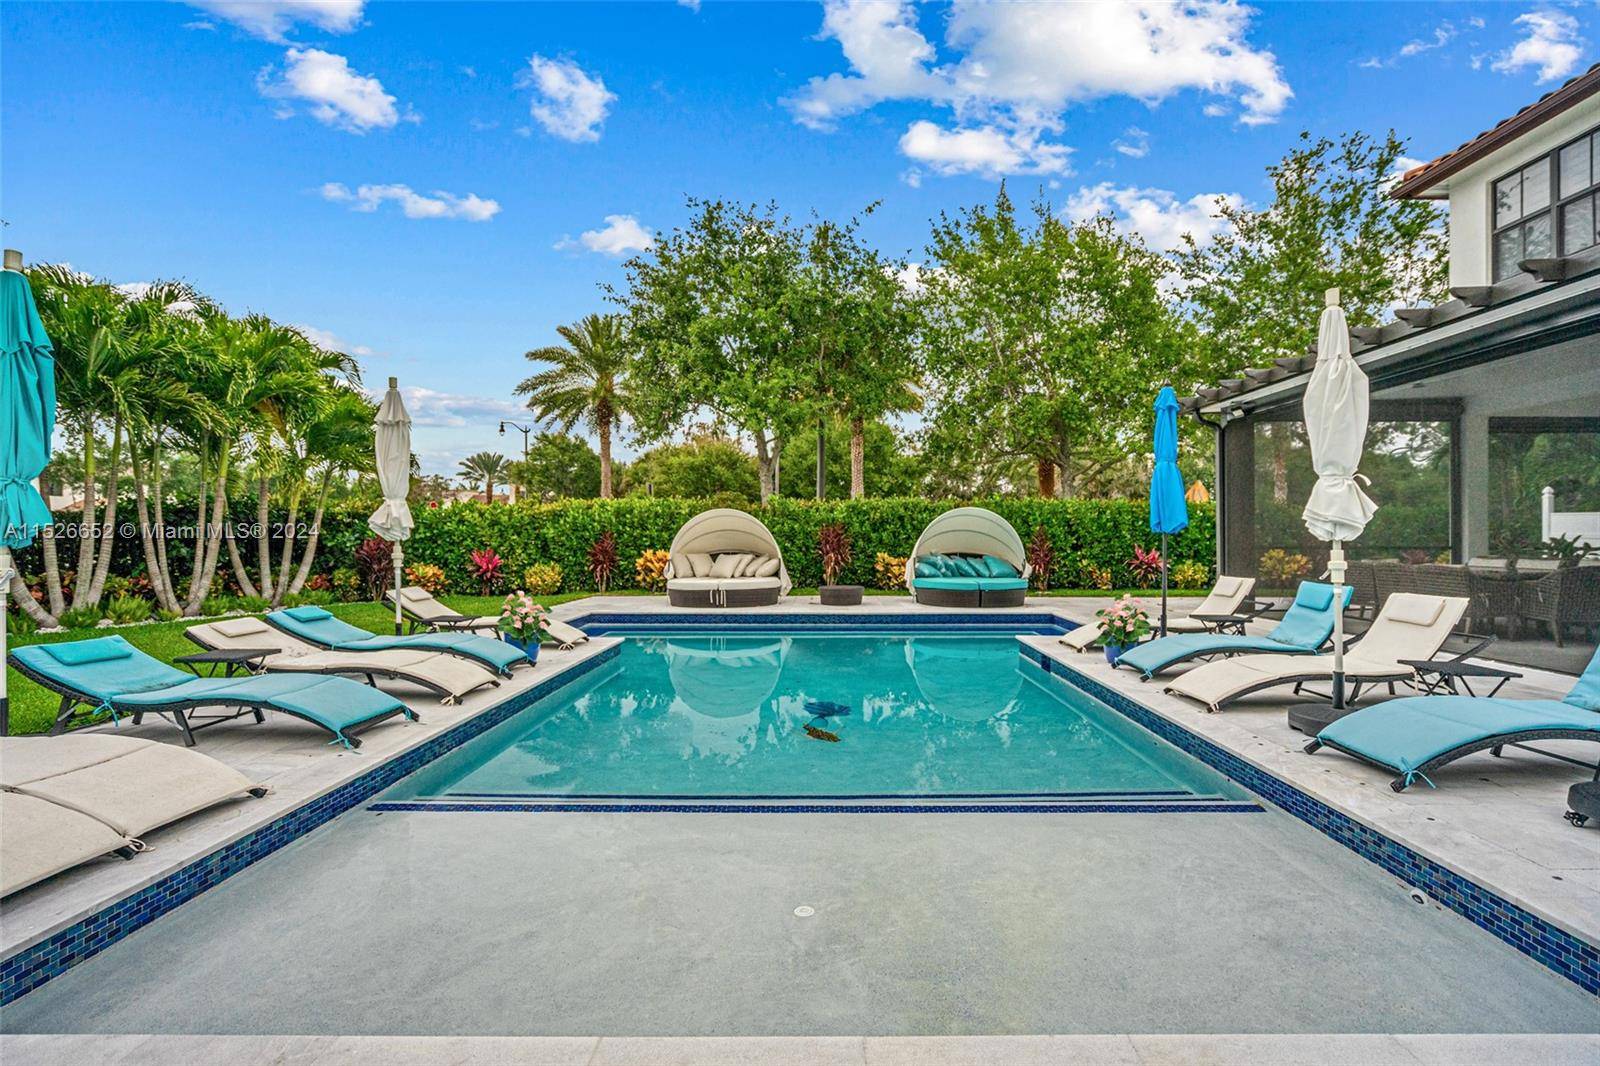 A fabulous luxurious retreat in the most sought after community.